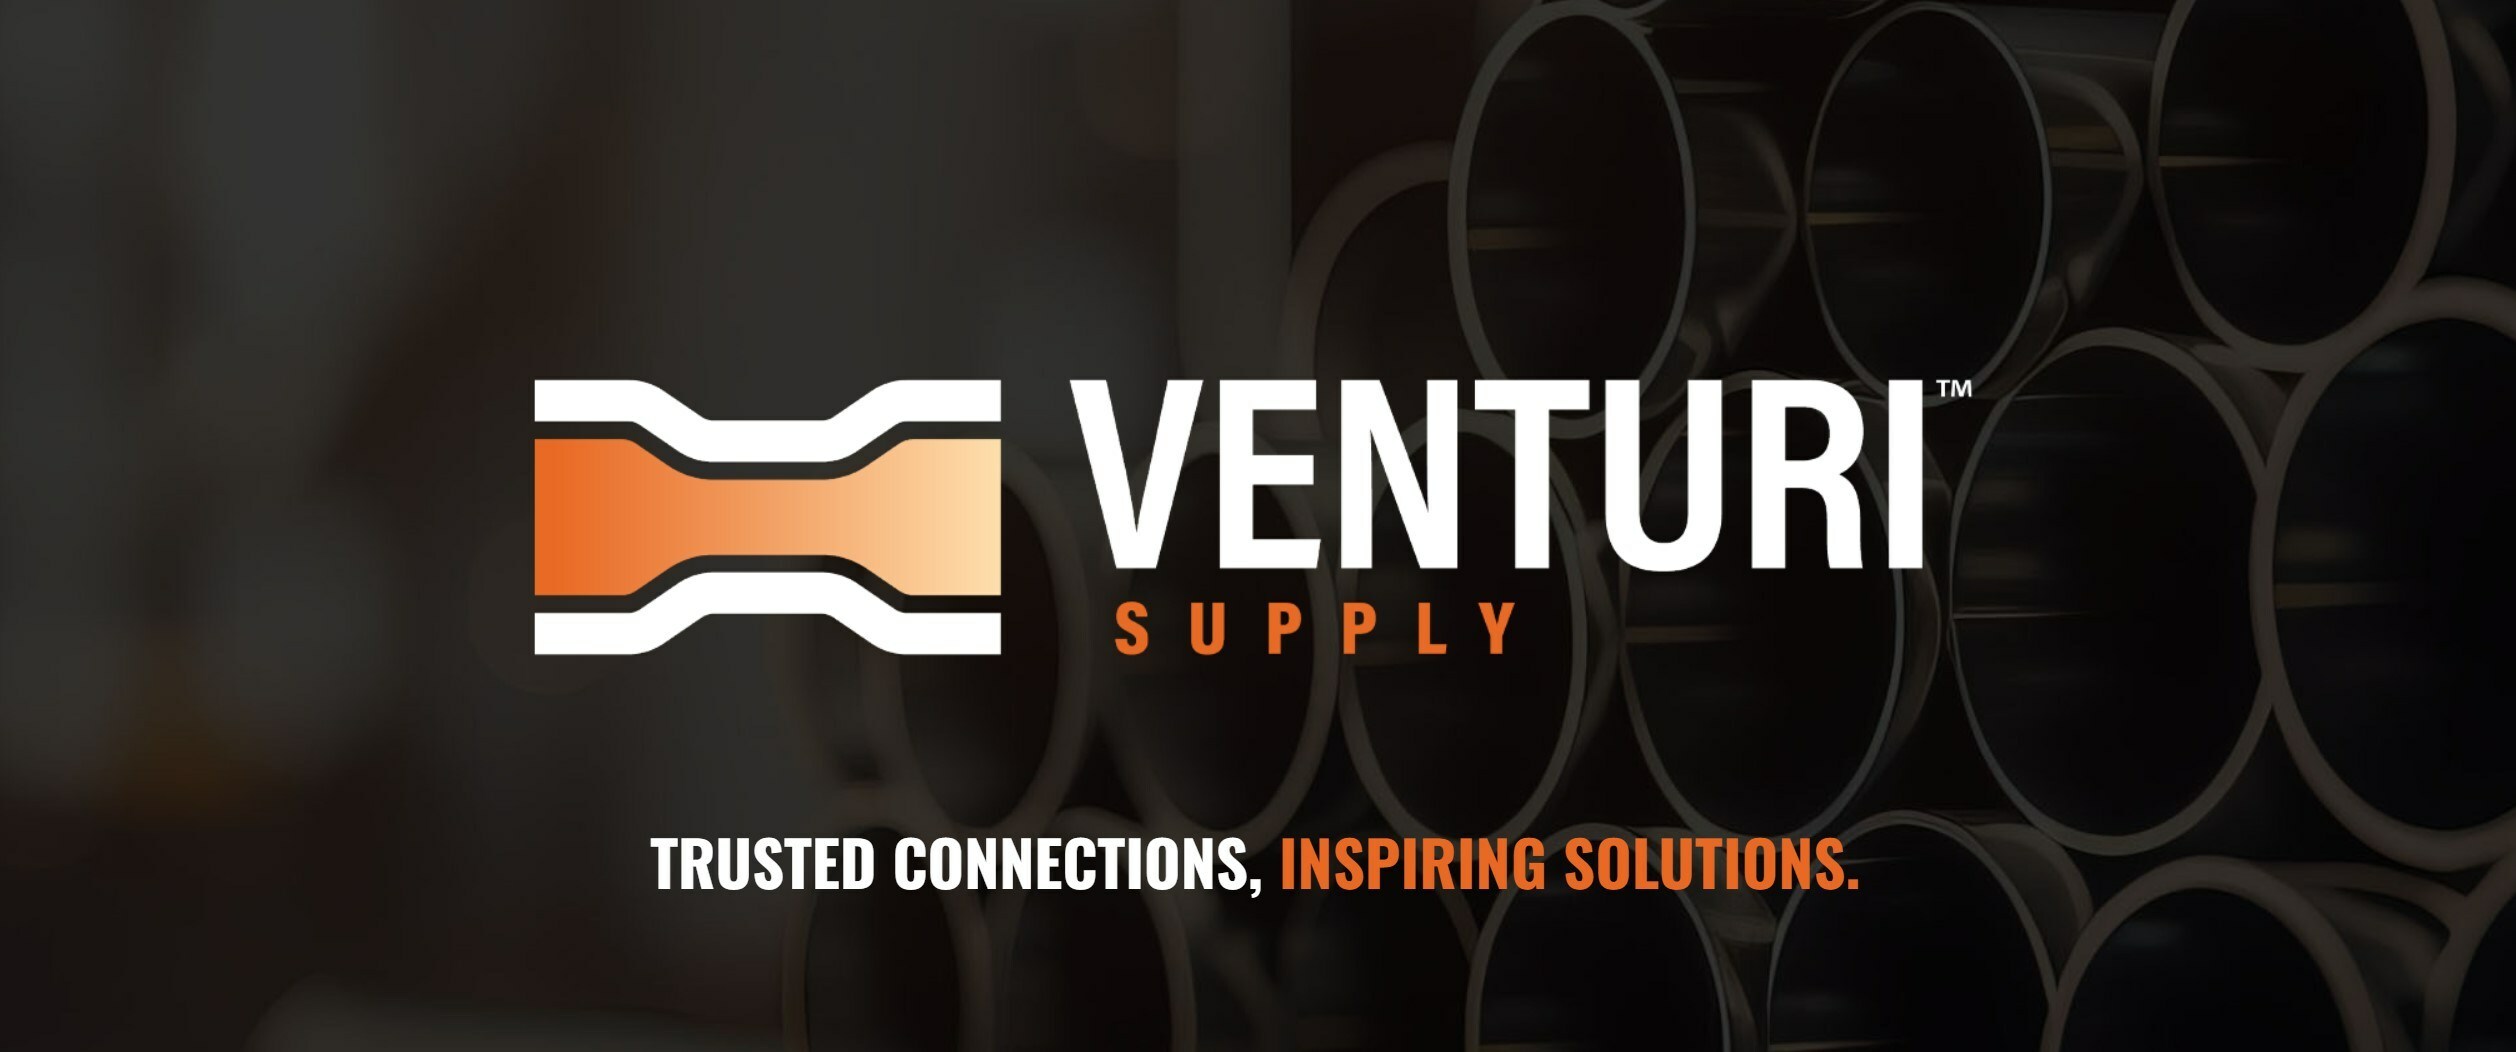 Venturi Supply is a distributor of pipe, valves, fittings, engineered products, and industrial supplies serving end users across a variety of mission-critical end markets.